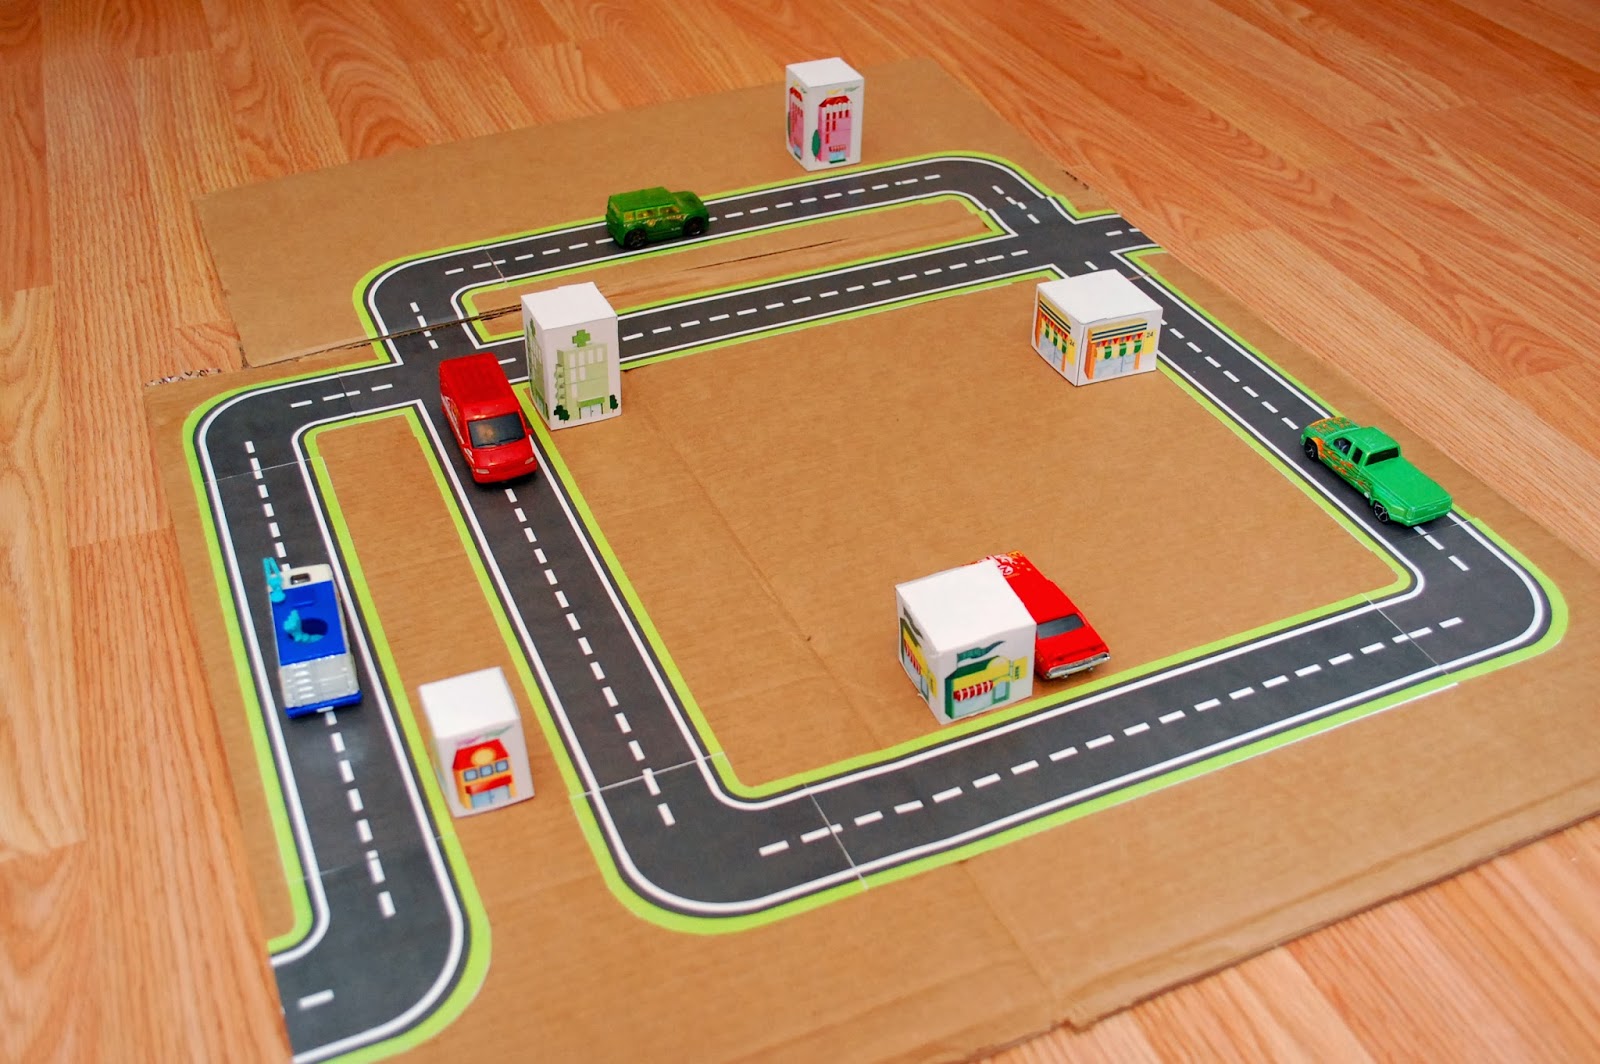 Printable Roads for Kids&rsquo; Toy Cars - So Here&rsquo;s My Life&hellip;